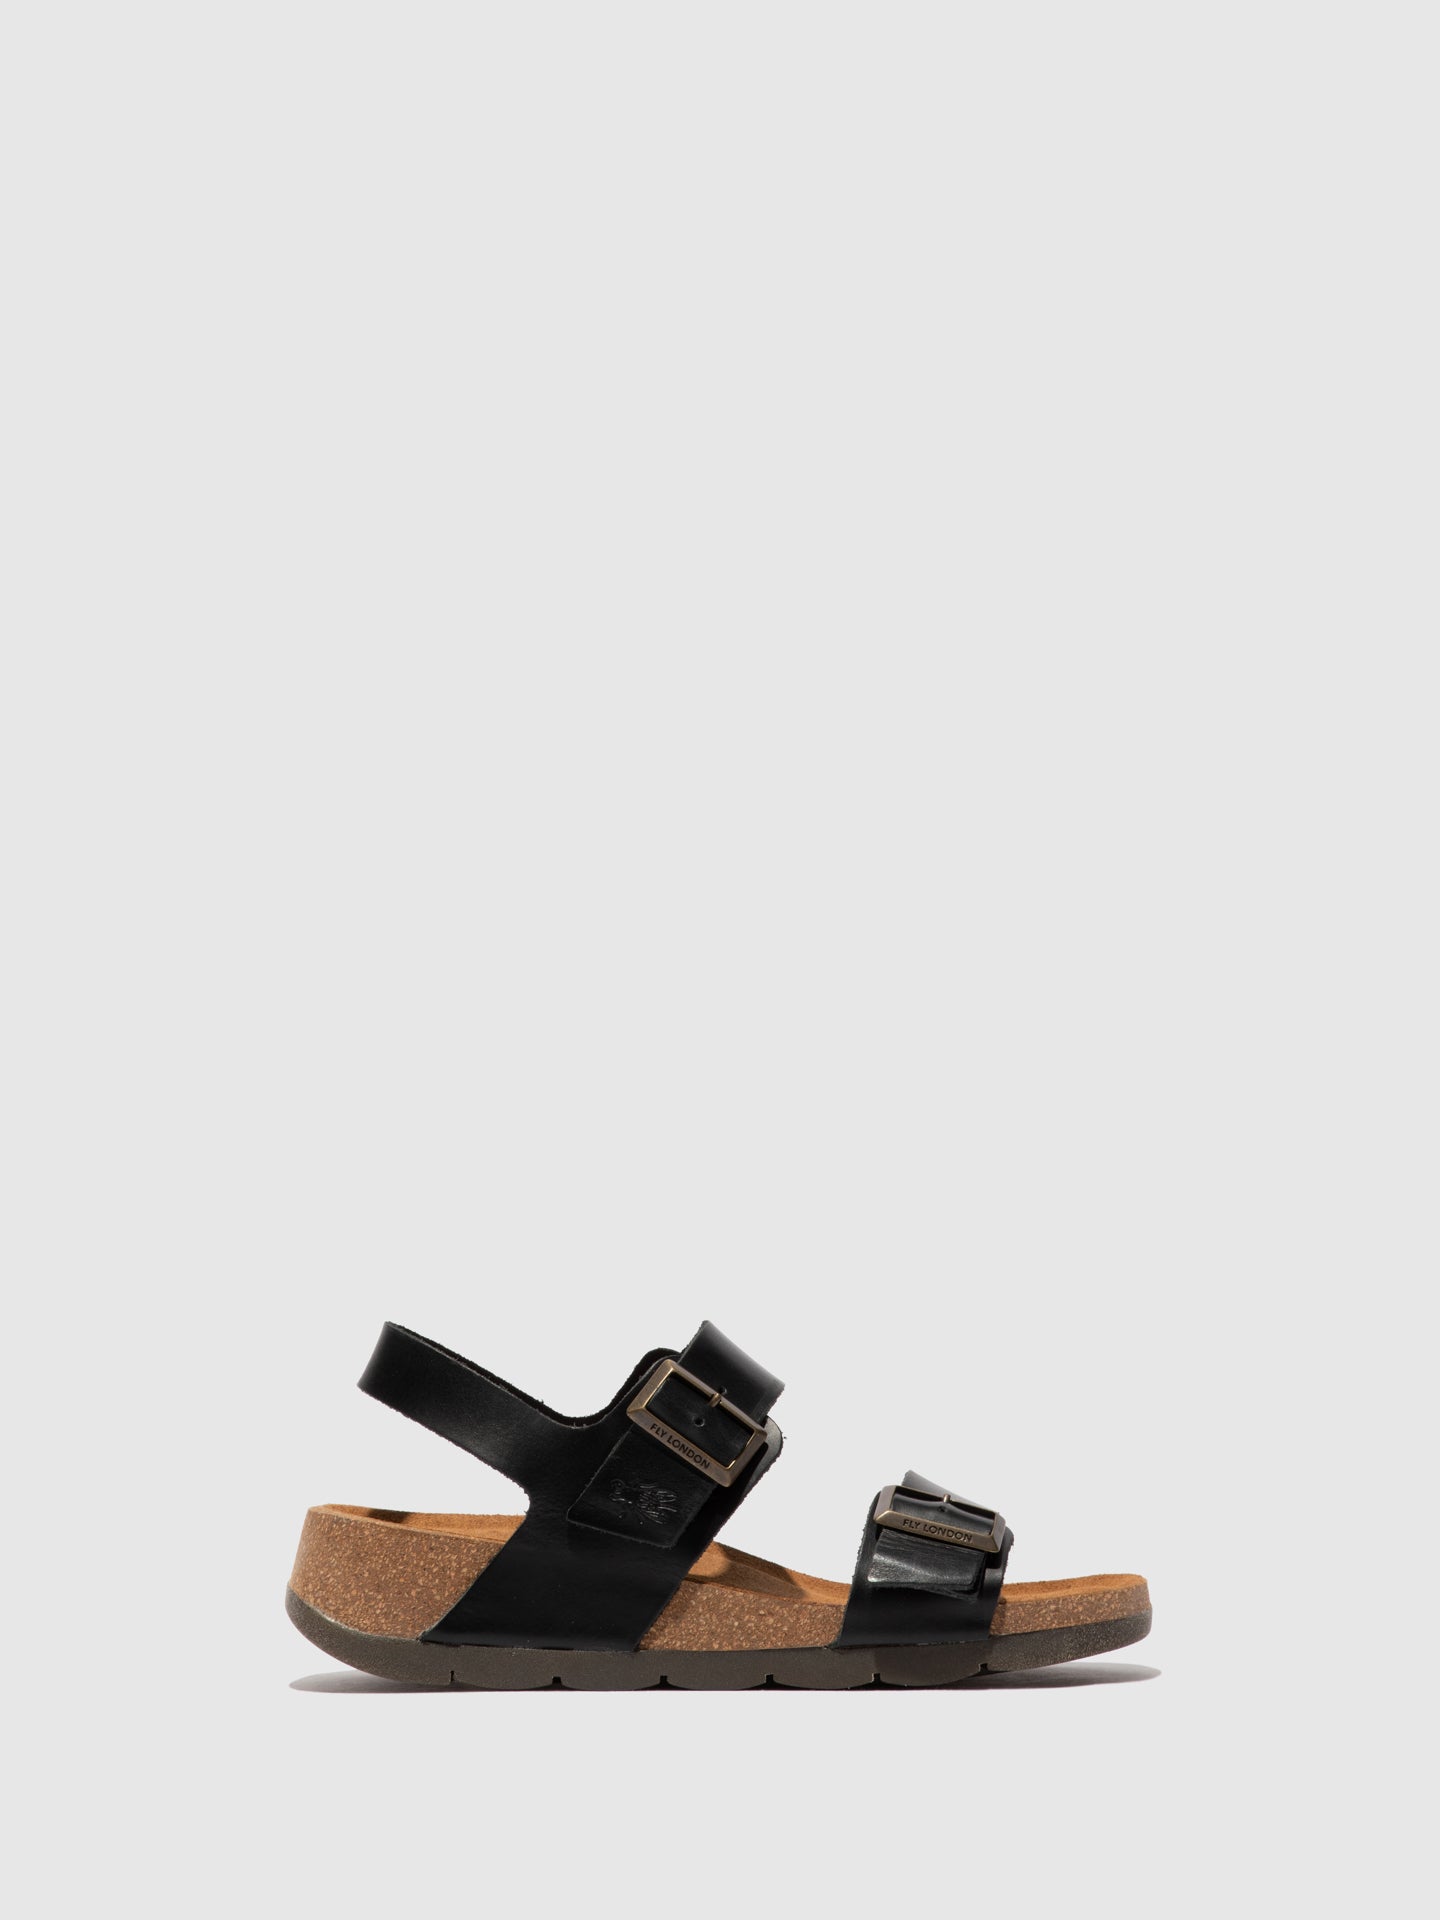 Fly London Buckle Sandals CEKE722FLY BRIDLE BLACK